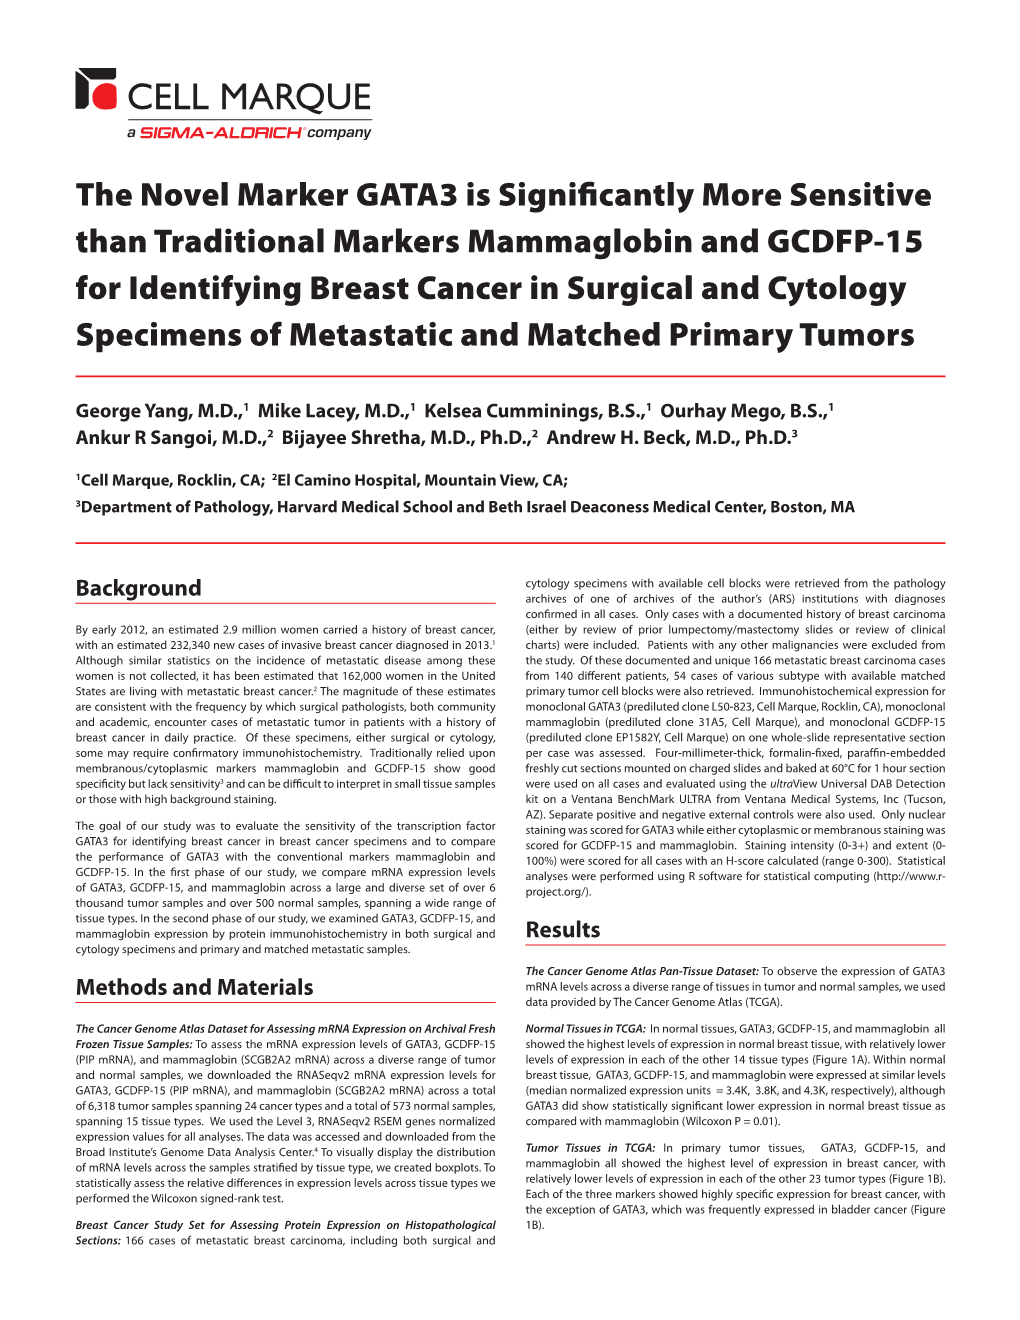 The Novel Marker GATA3 Is Significantly More Sensitive Than